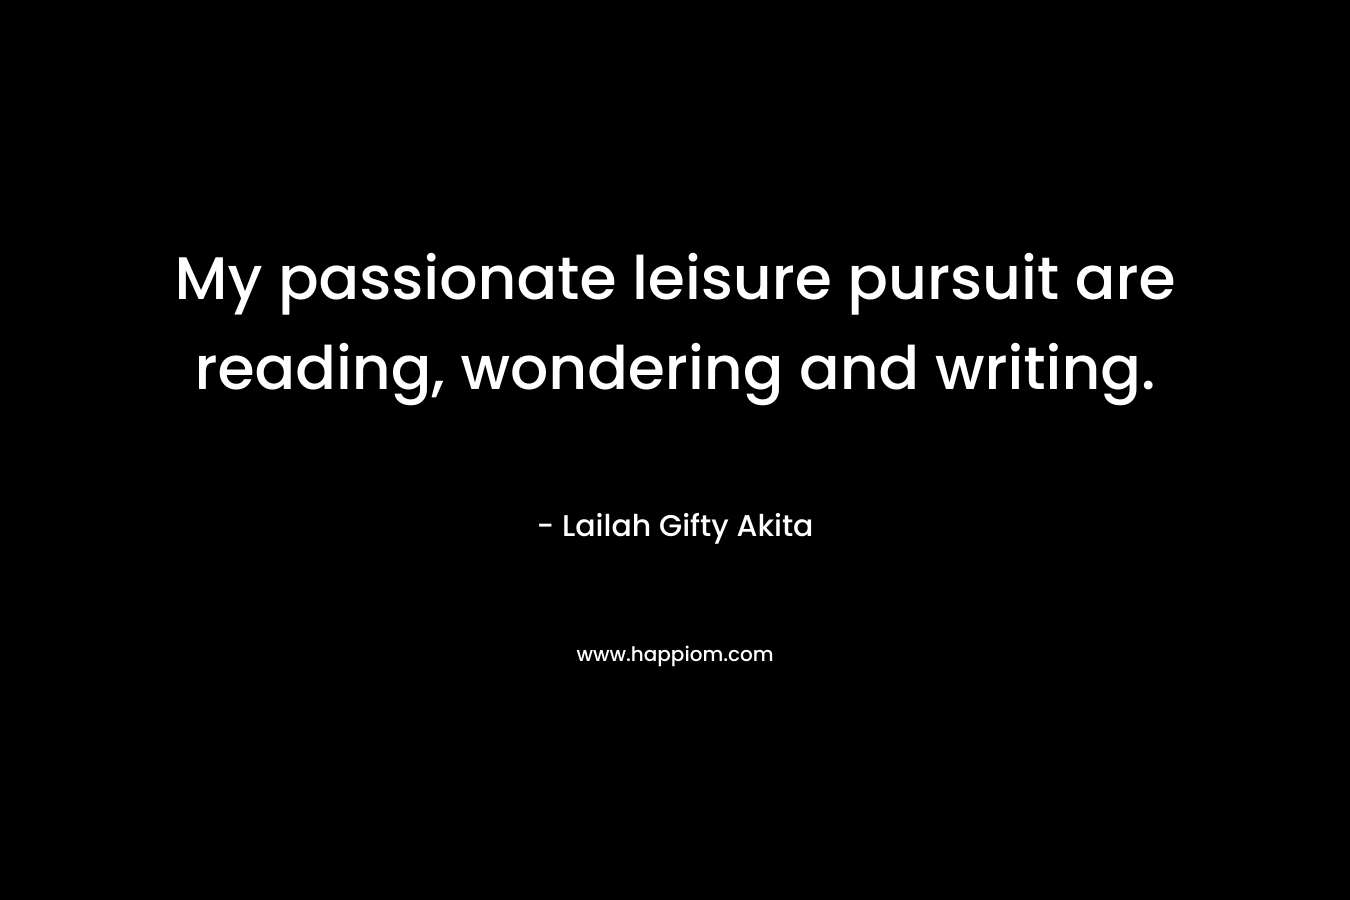 My passionate leisure pursuit are reading, wondering and writing.